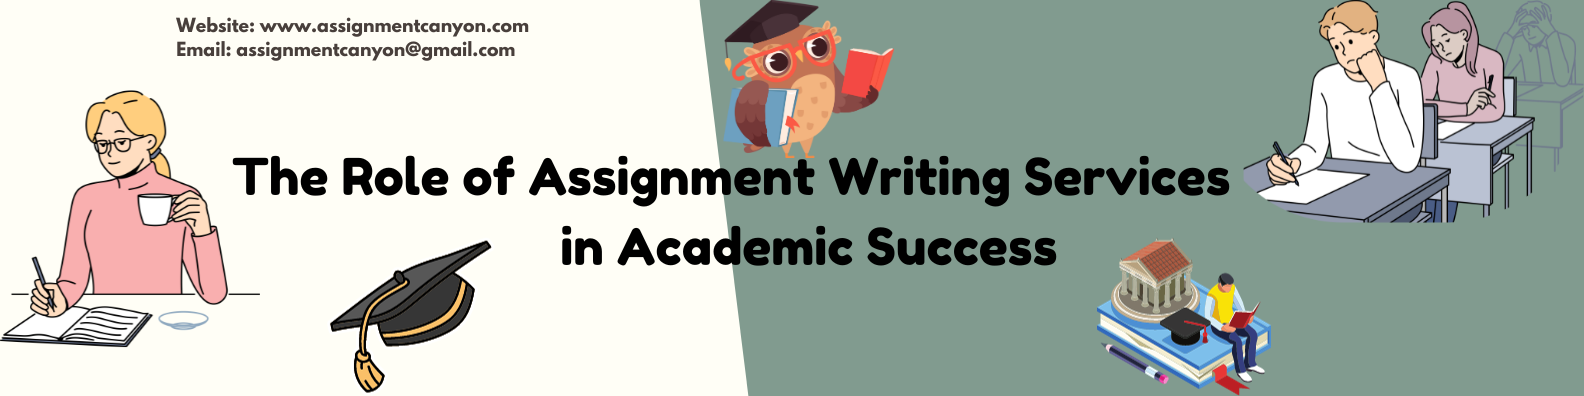 The role of assignment writing services in academic success for college students